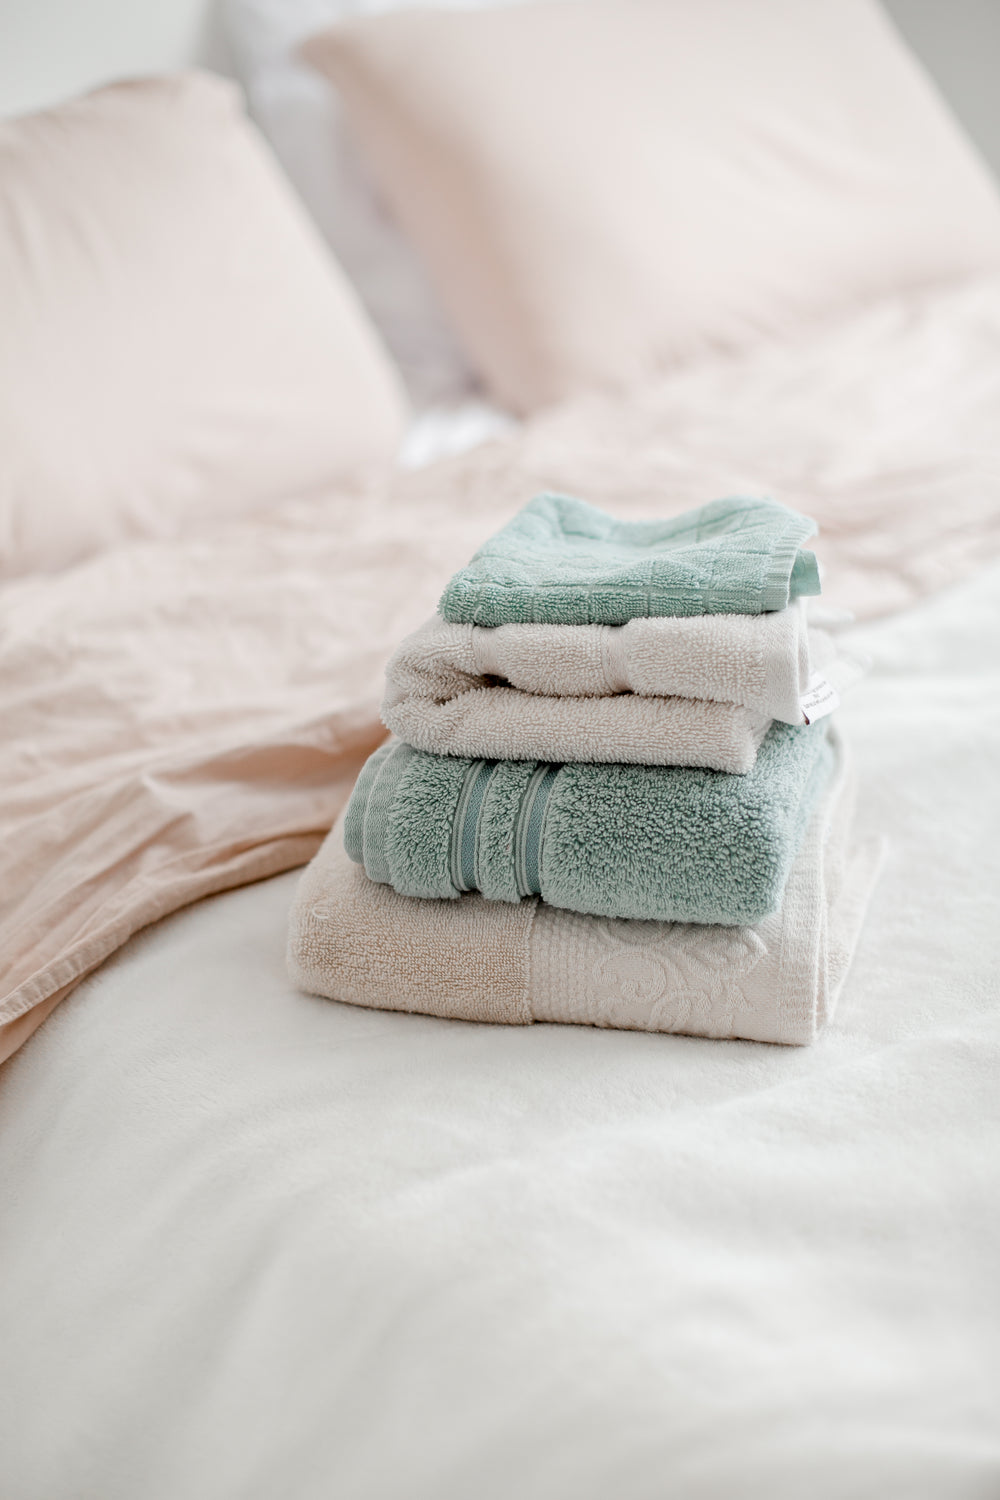 neatly folded towels placed on a bed